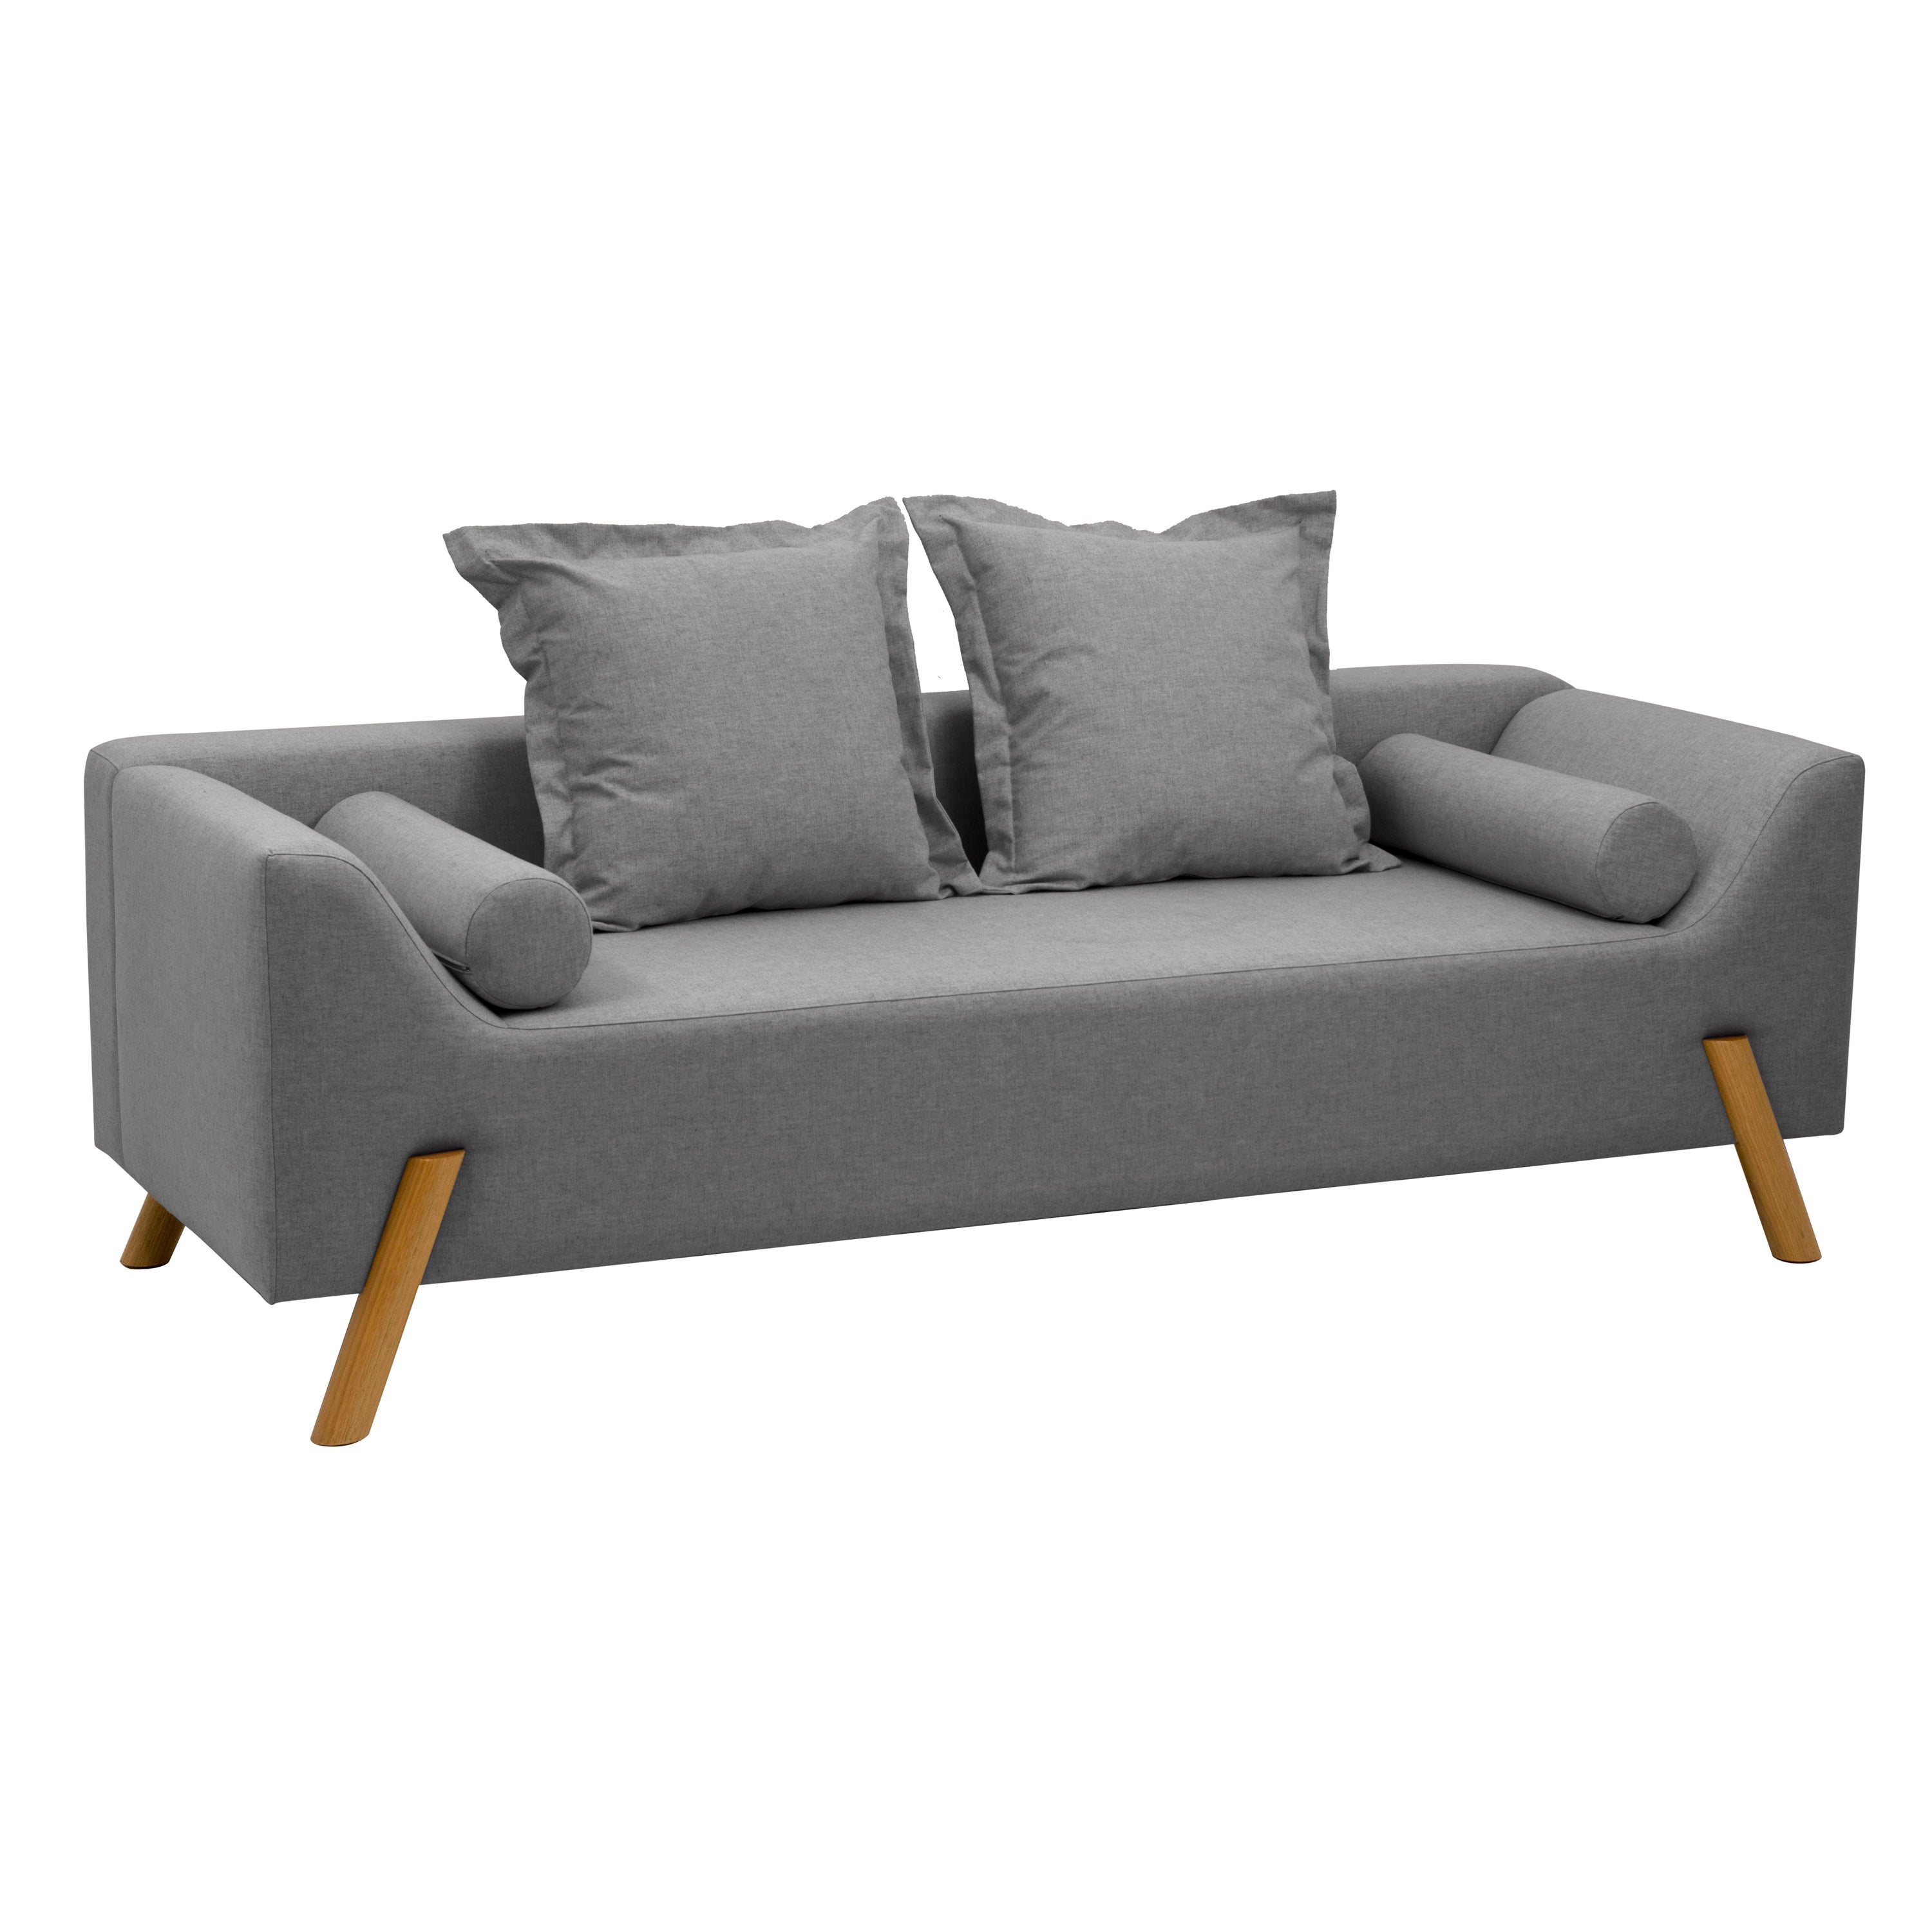 "Flag" Couch in Dark Grey Linen and Wood Feet